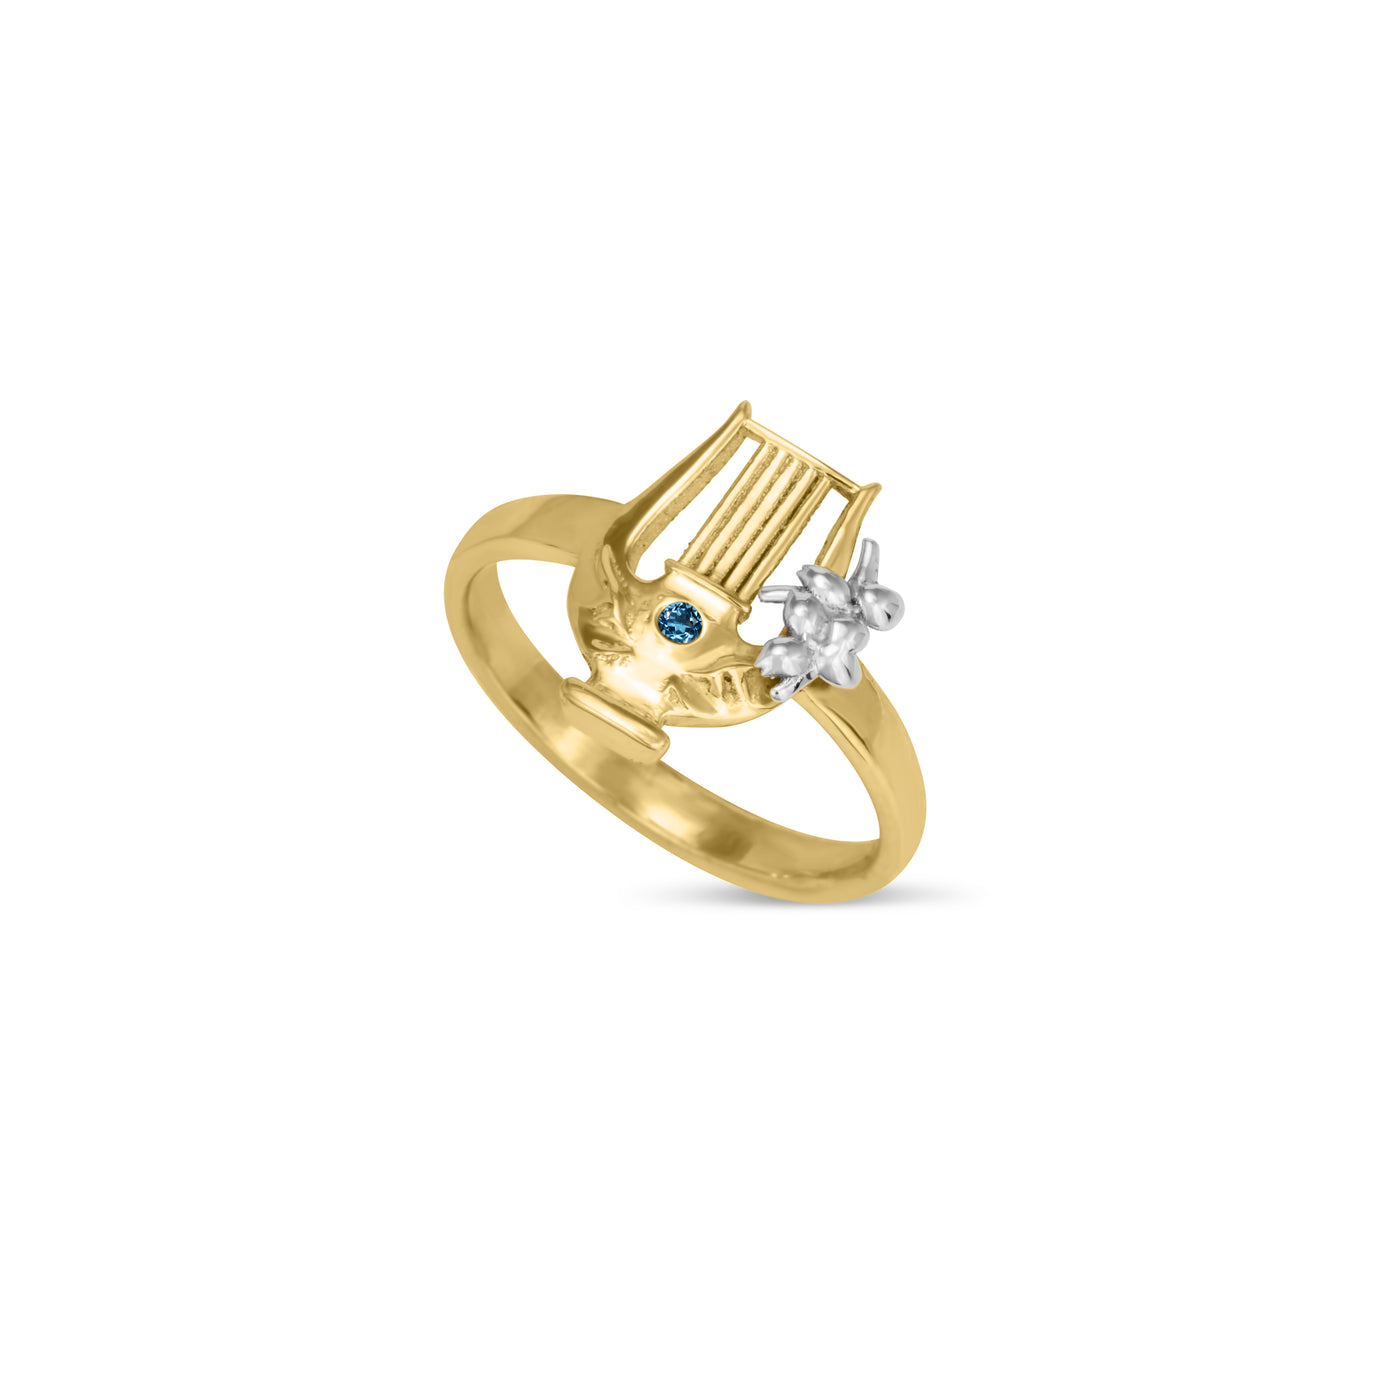 Venti Lyre Ring with Topaz